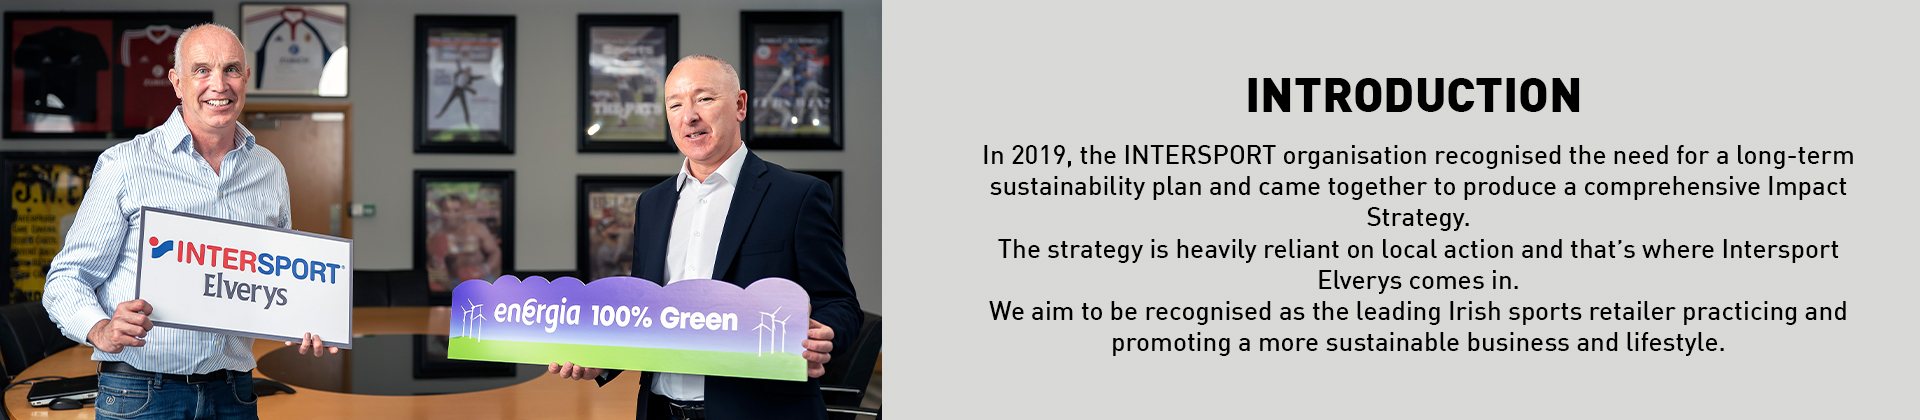 In 2019, the INTERSPORT organisation recognised the need for a long-term sustainability plan and came together to produce a comprehensive Impact Strategy. The strategy is heavily reliant on local action and that’s where Intersport Elverys comes in. 